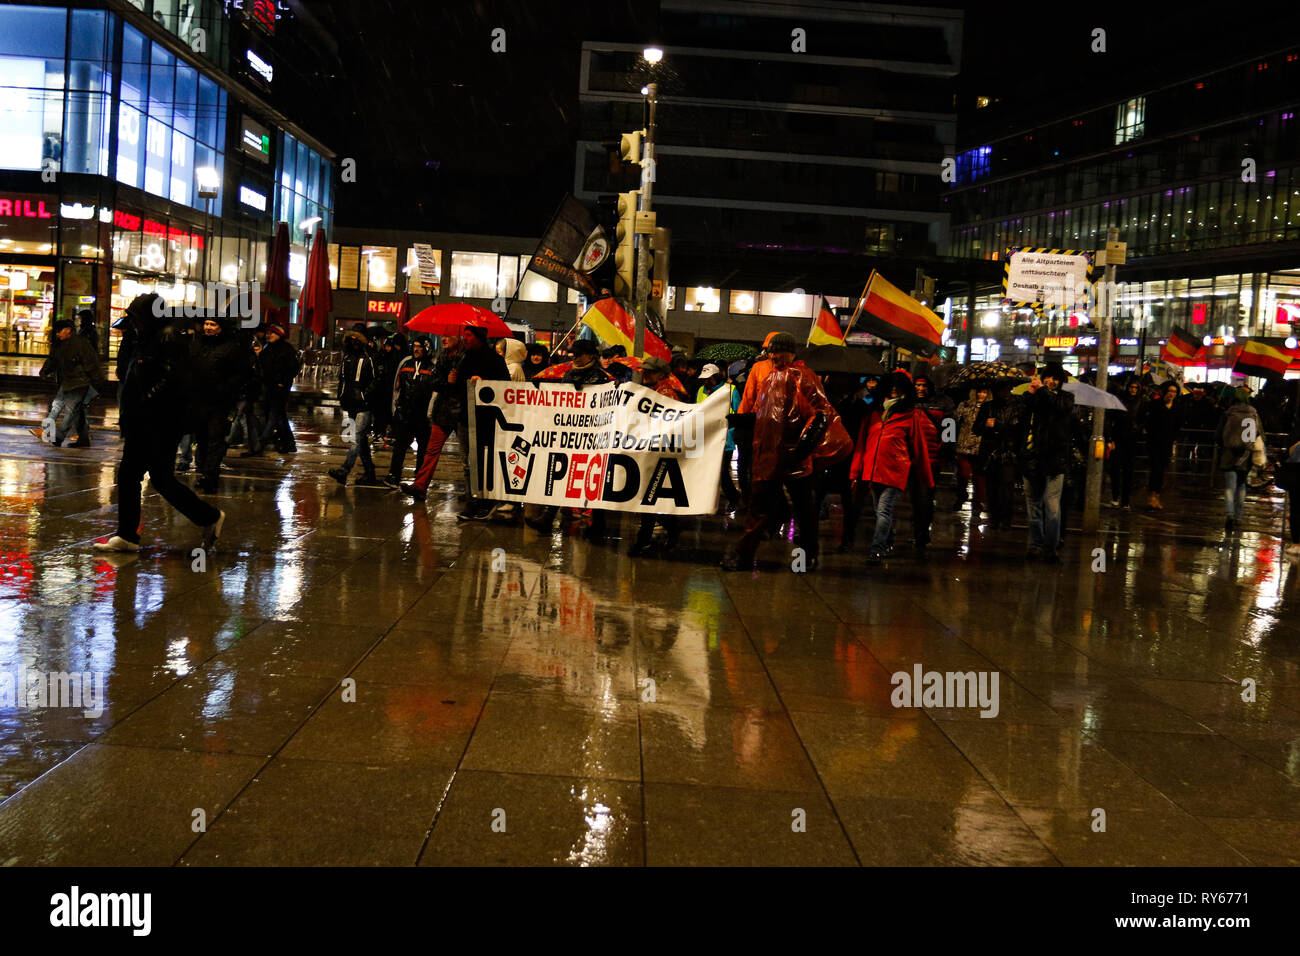 Dresden, Germany, March 11, 2019 Anti-fascist protest in Dresden, Credit: Lidia Mukhamadeeva/Alamy Live News Credit: Lidia Mukhamadeeva/Alamy Live News Stock Photo